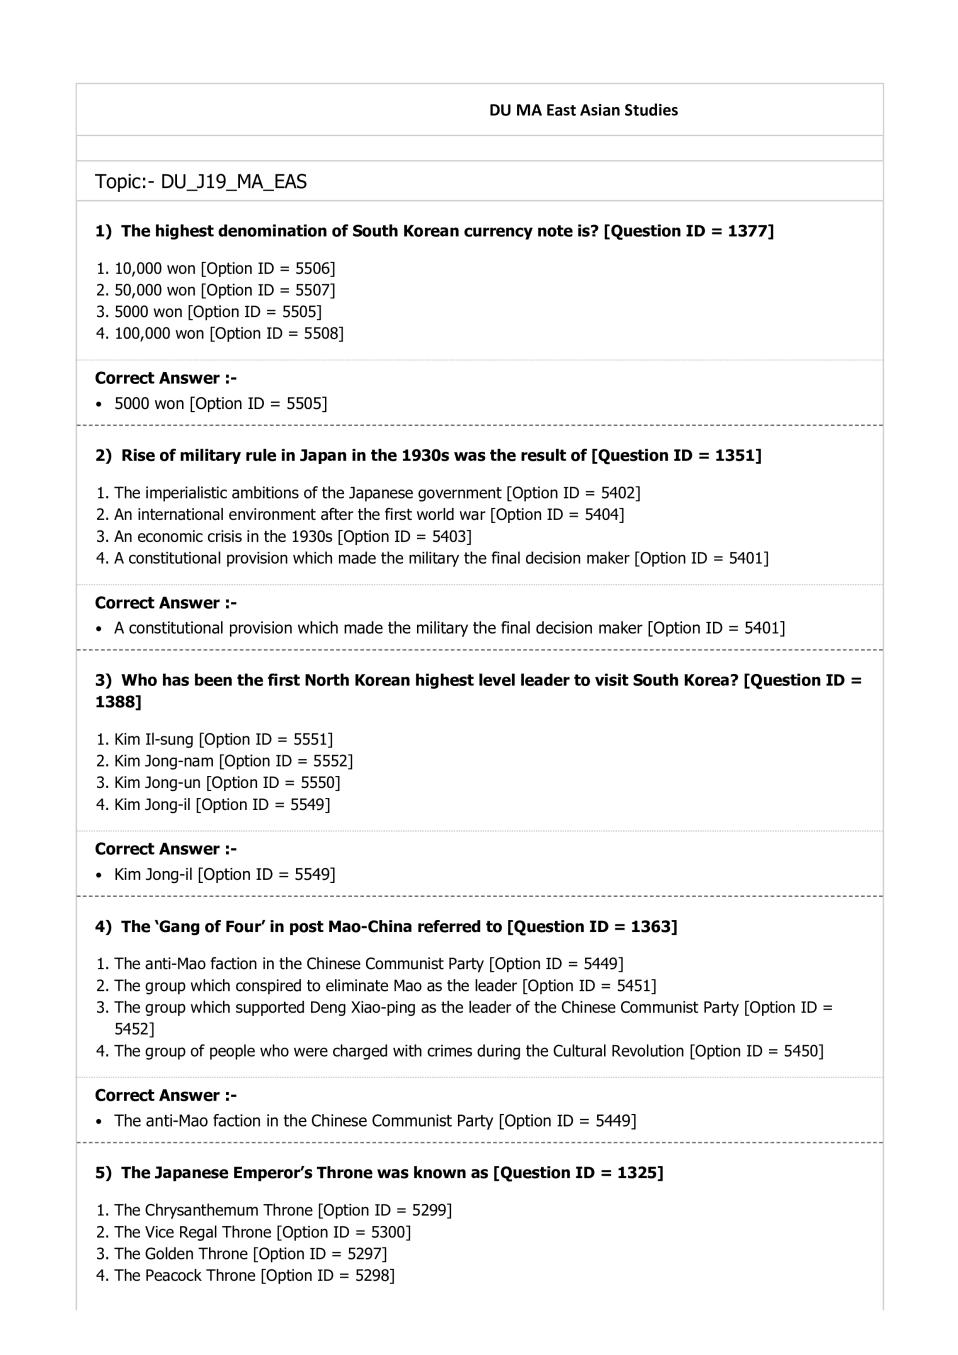 DUET Question Paper 2019 for MA East Asian Studies - Page 1